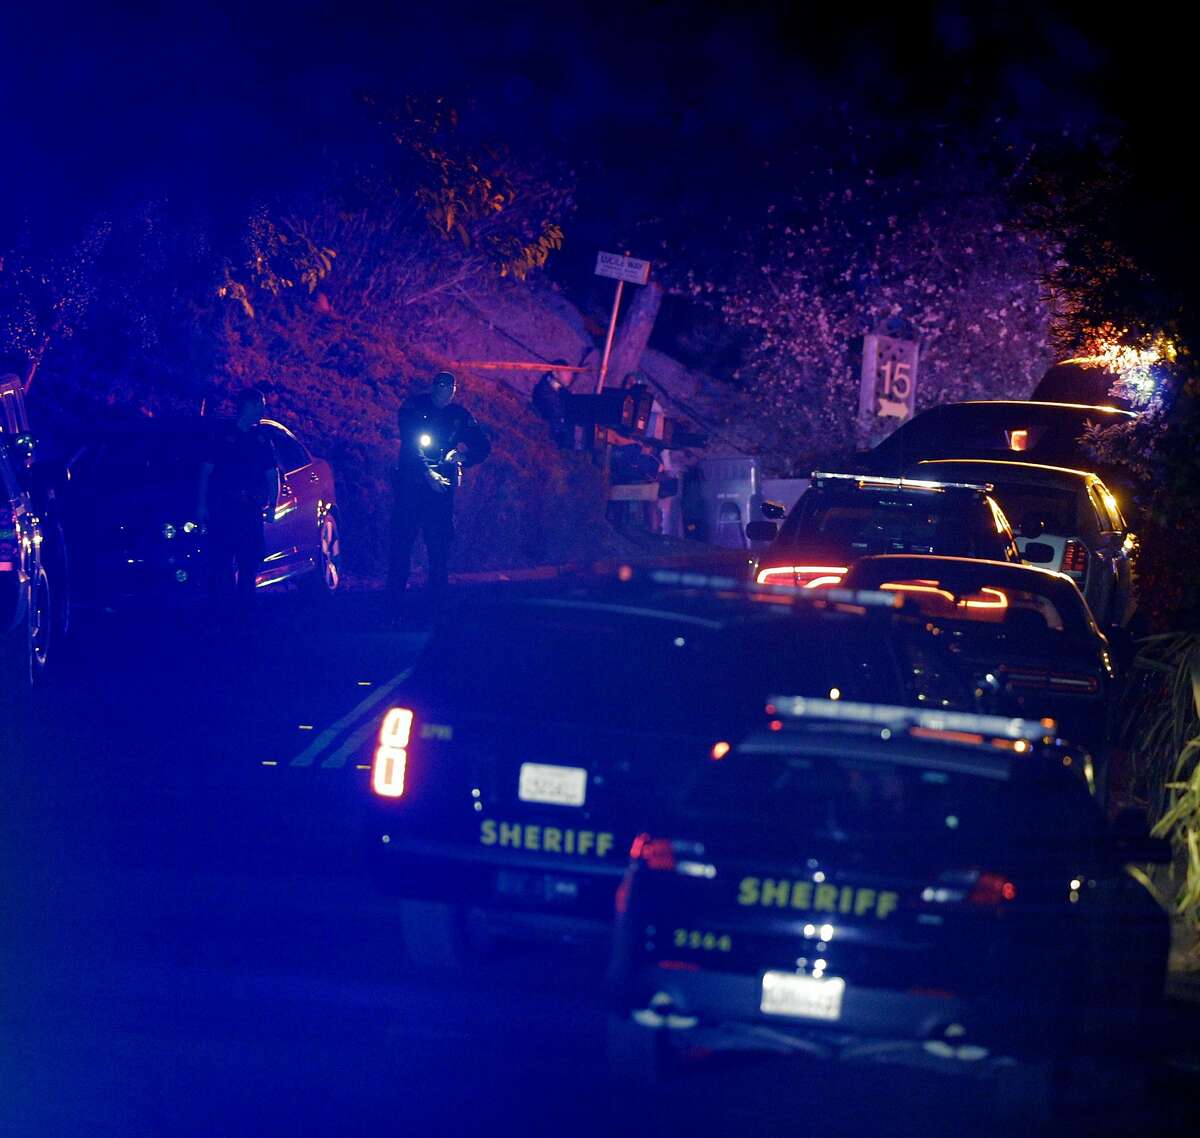 Contra Costa Sheriffs deputies walk near a crime scene on Knickerbocker Lane near the location where several people were shot at a Halloween party on Lucille Way in Orinda , Calif., on Friday, November 1, 2019. Early reports stated that 4 people had been killed with others injured and transported to nearby hospitals. Though several of the injuries were believed to have been caused when guests ran from the shooting.